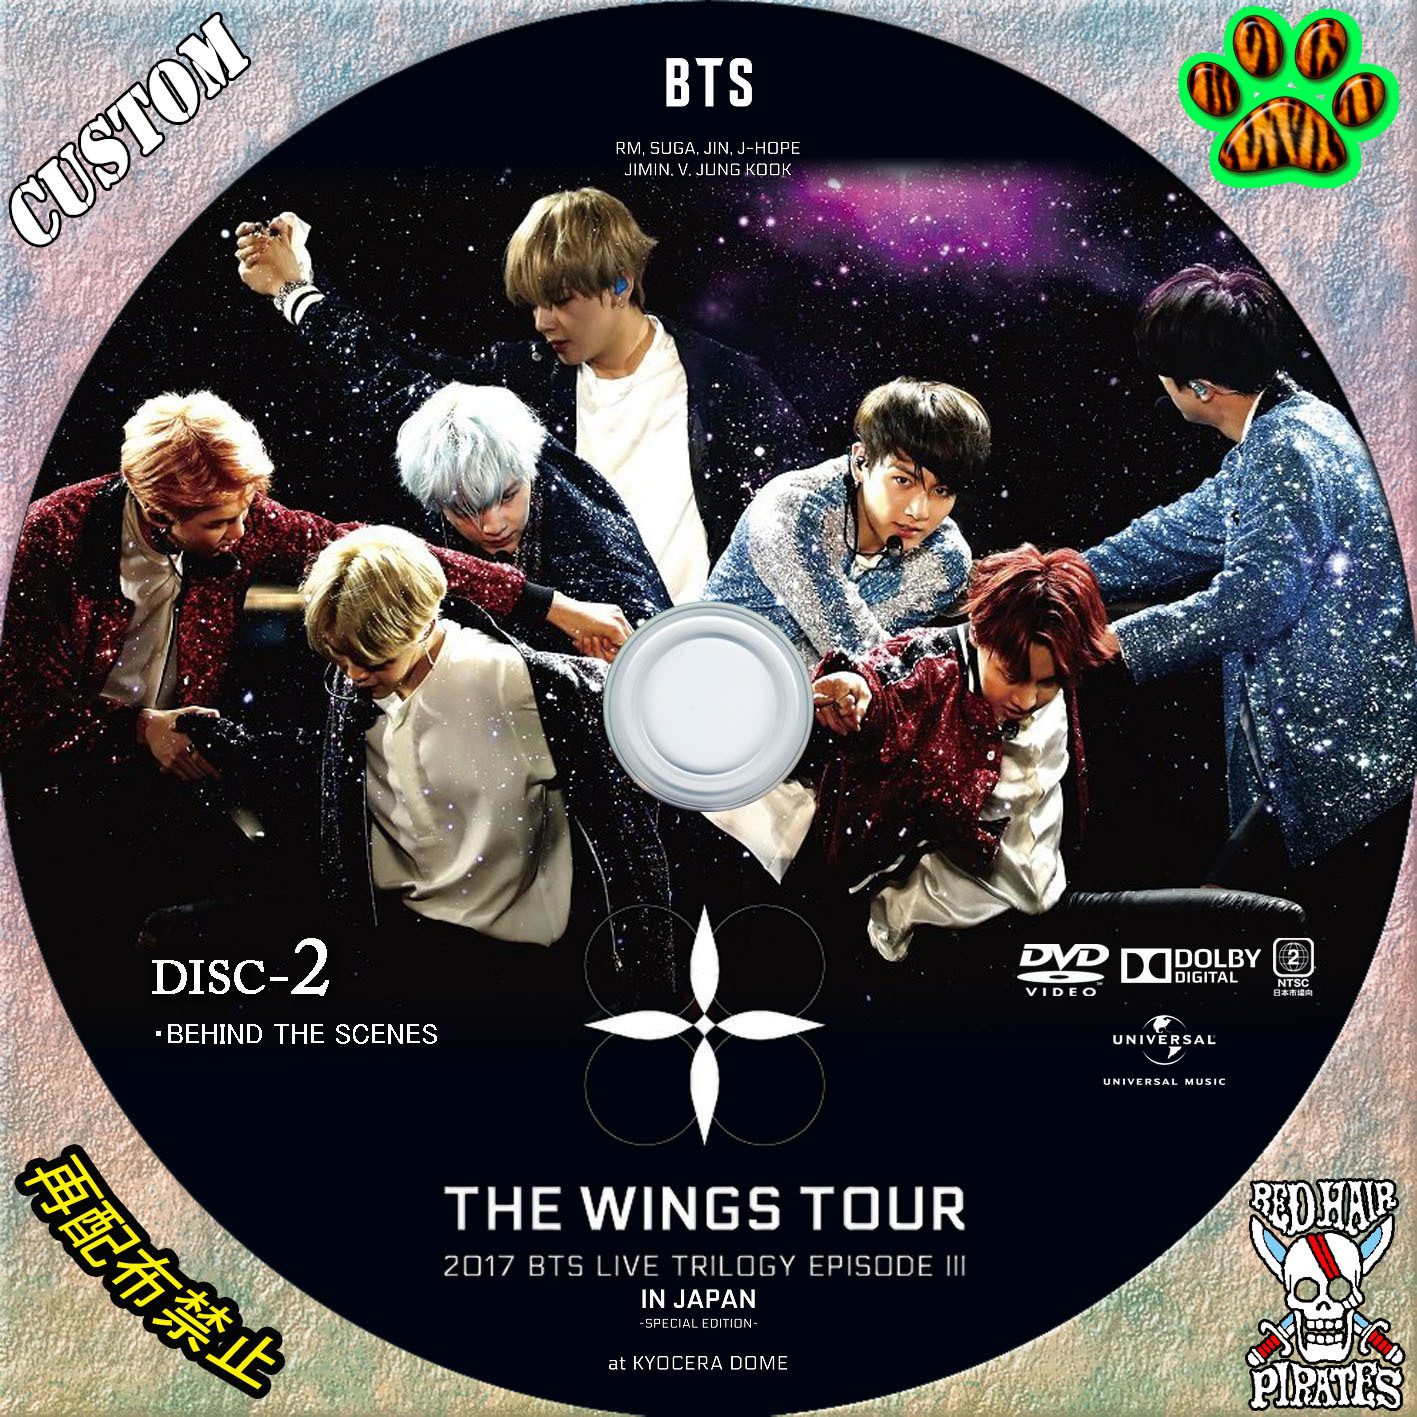 THE WINGS TOUR(通常盤) DVD＋cookyおまけ付????